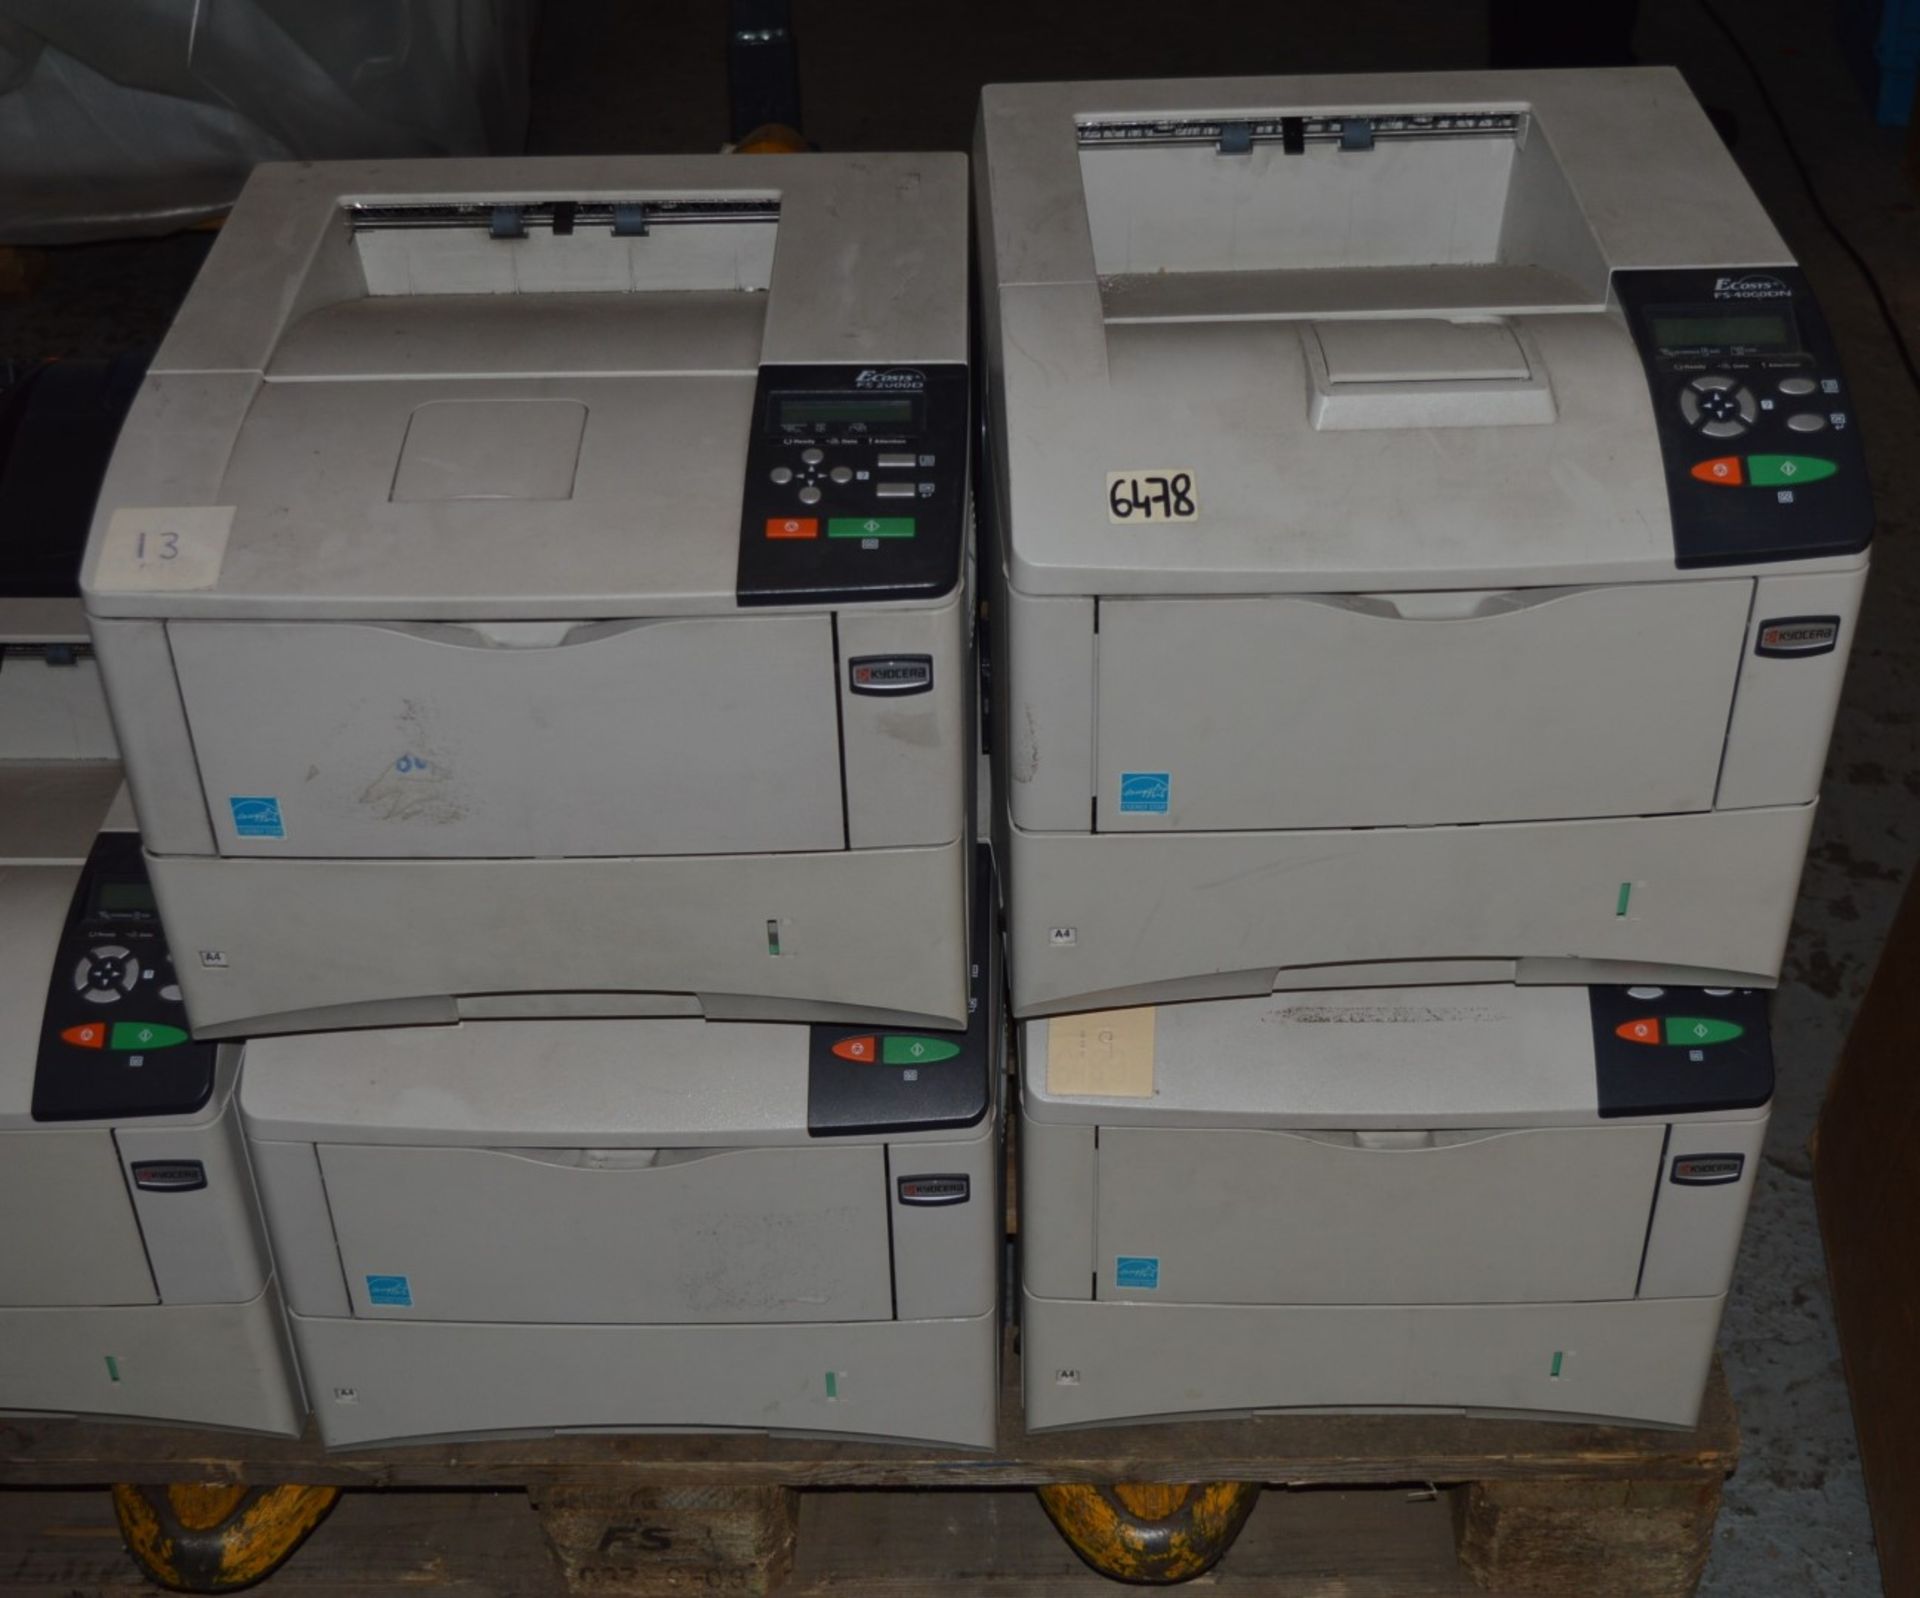 8 x Ecosys Office Laser Printers - Models Include FS4020DN, FS4000DN and FS4000D - CL011 -